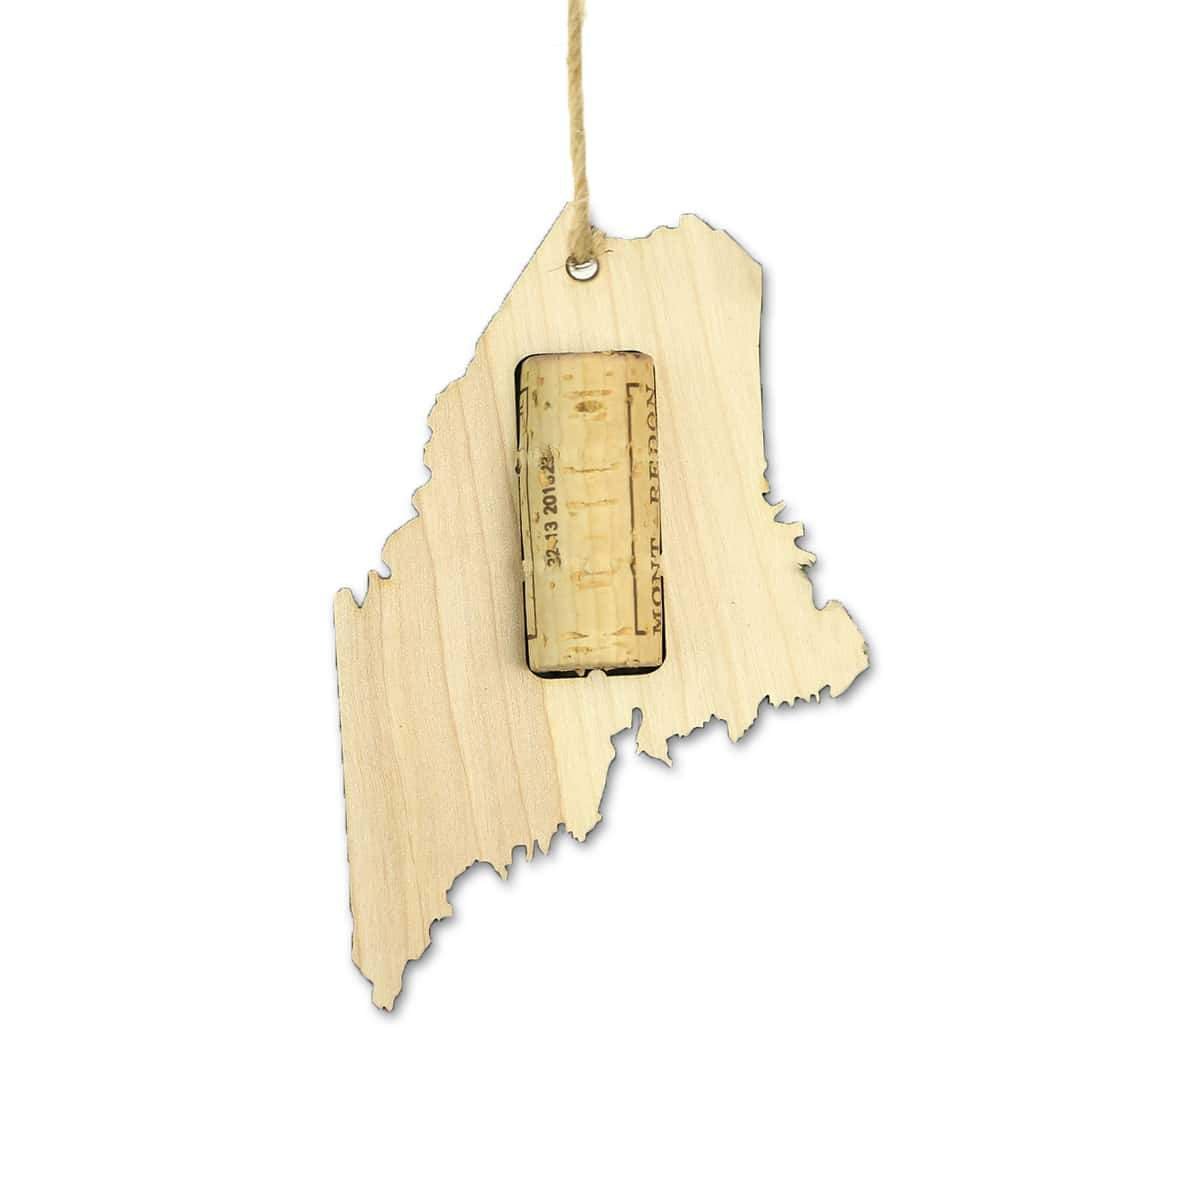 Torched Products Wine Cork Holder Maine Wine Cork Holder Ornaments (781199966325)